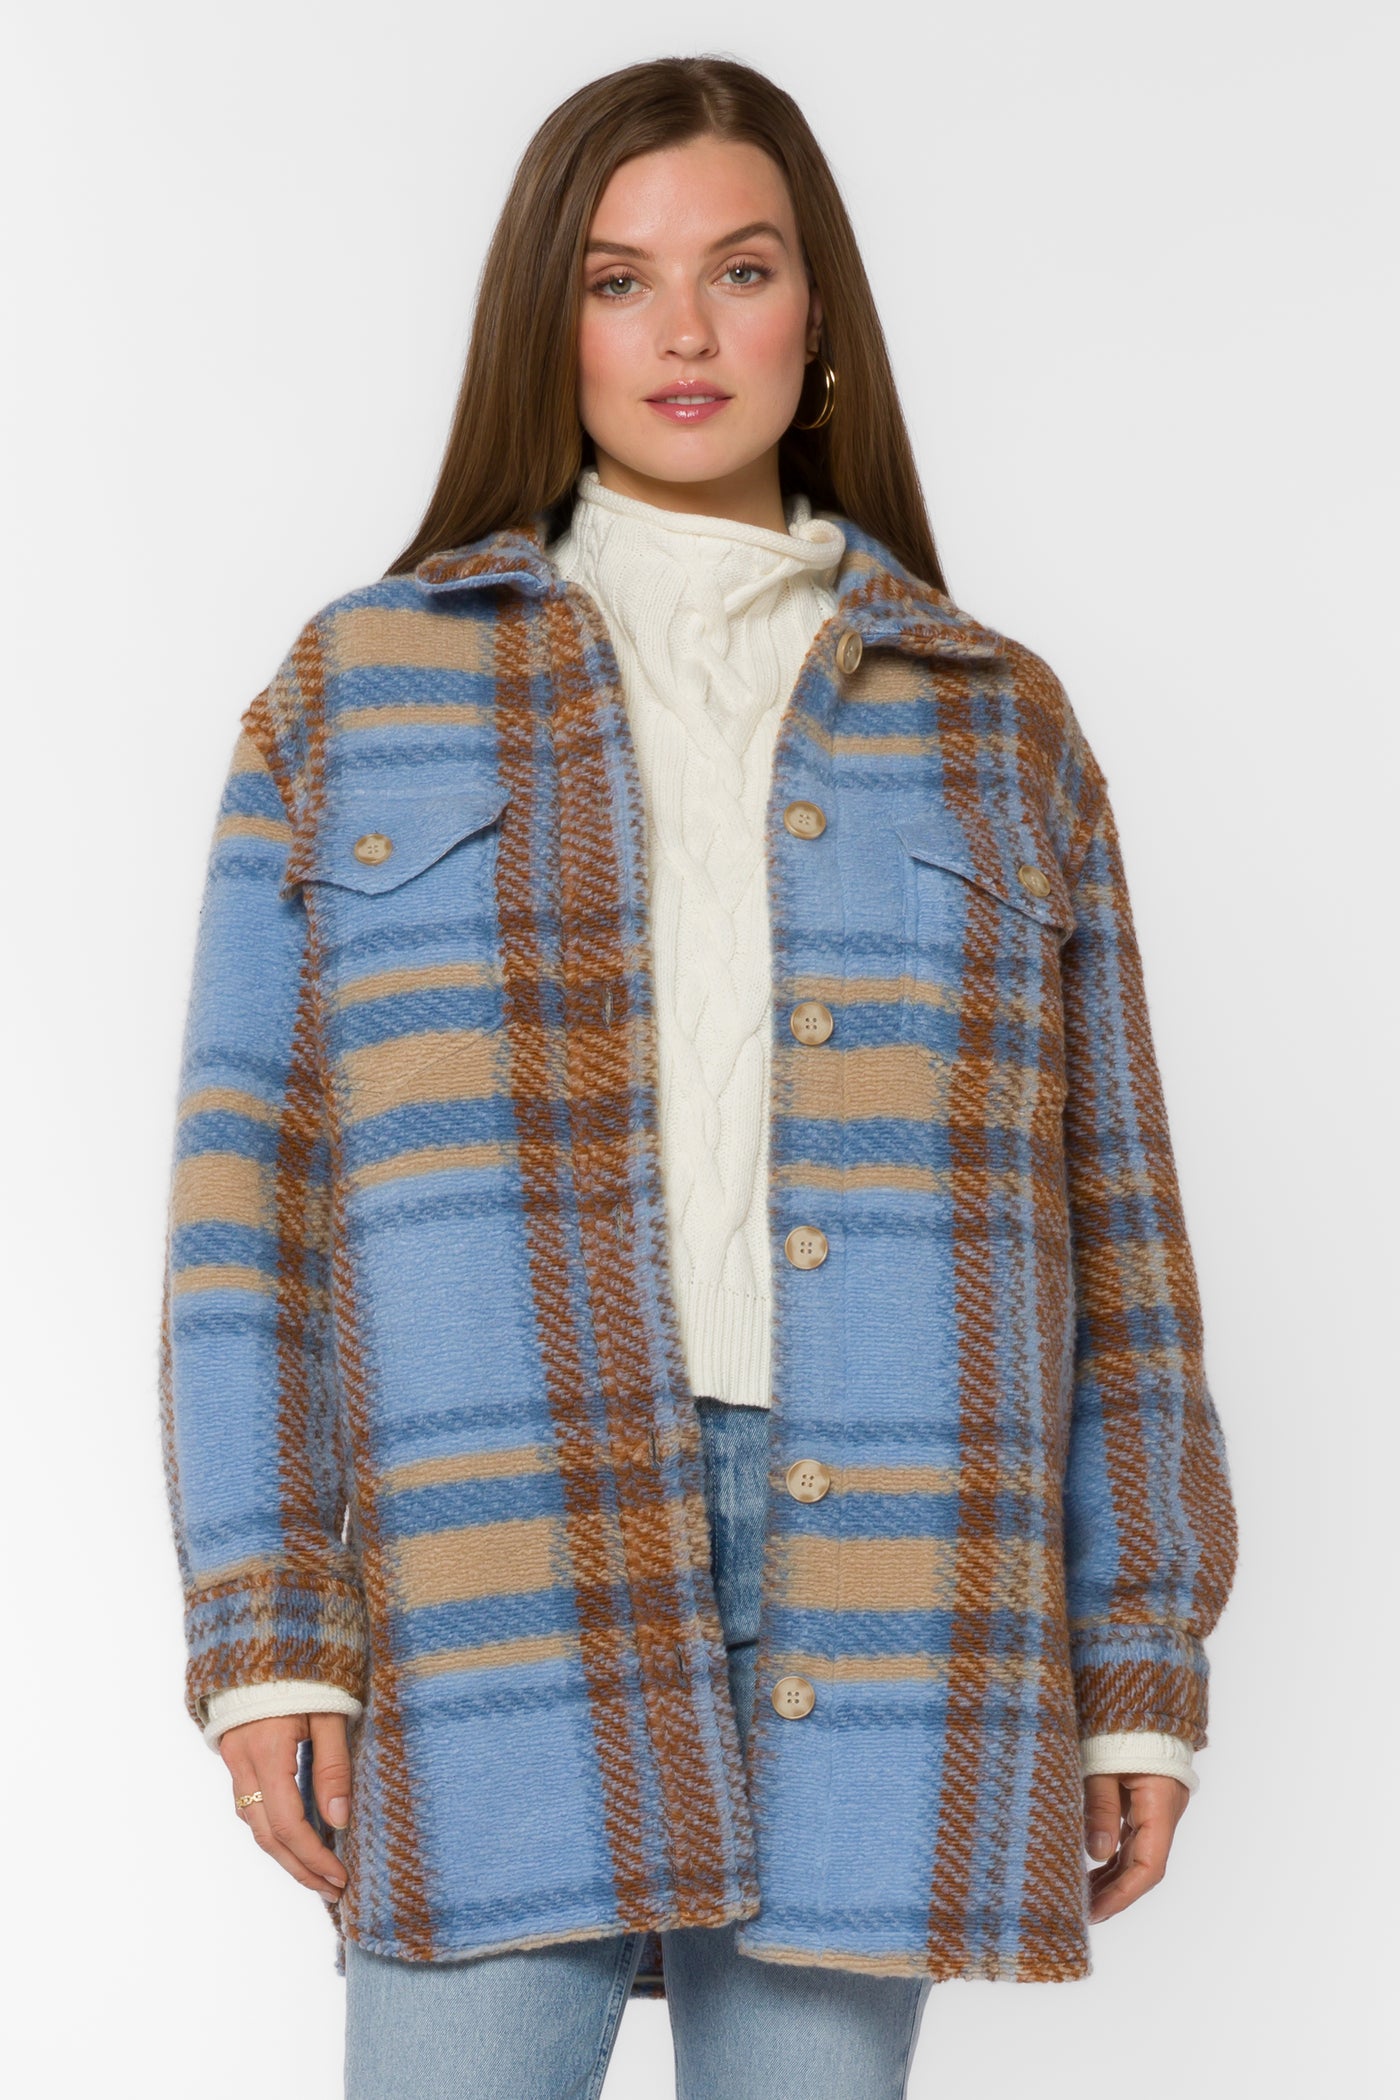 Royce Blue Brown Plaid Shacket - Jackets & Outerwear - Velvet Heart Clothing